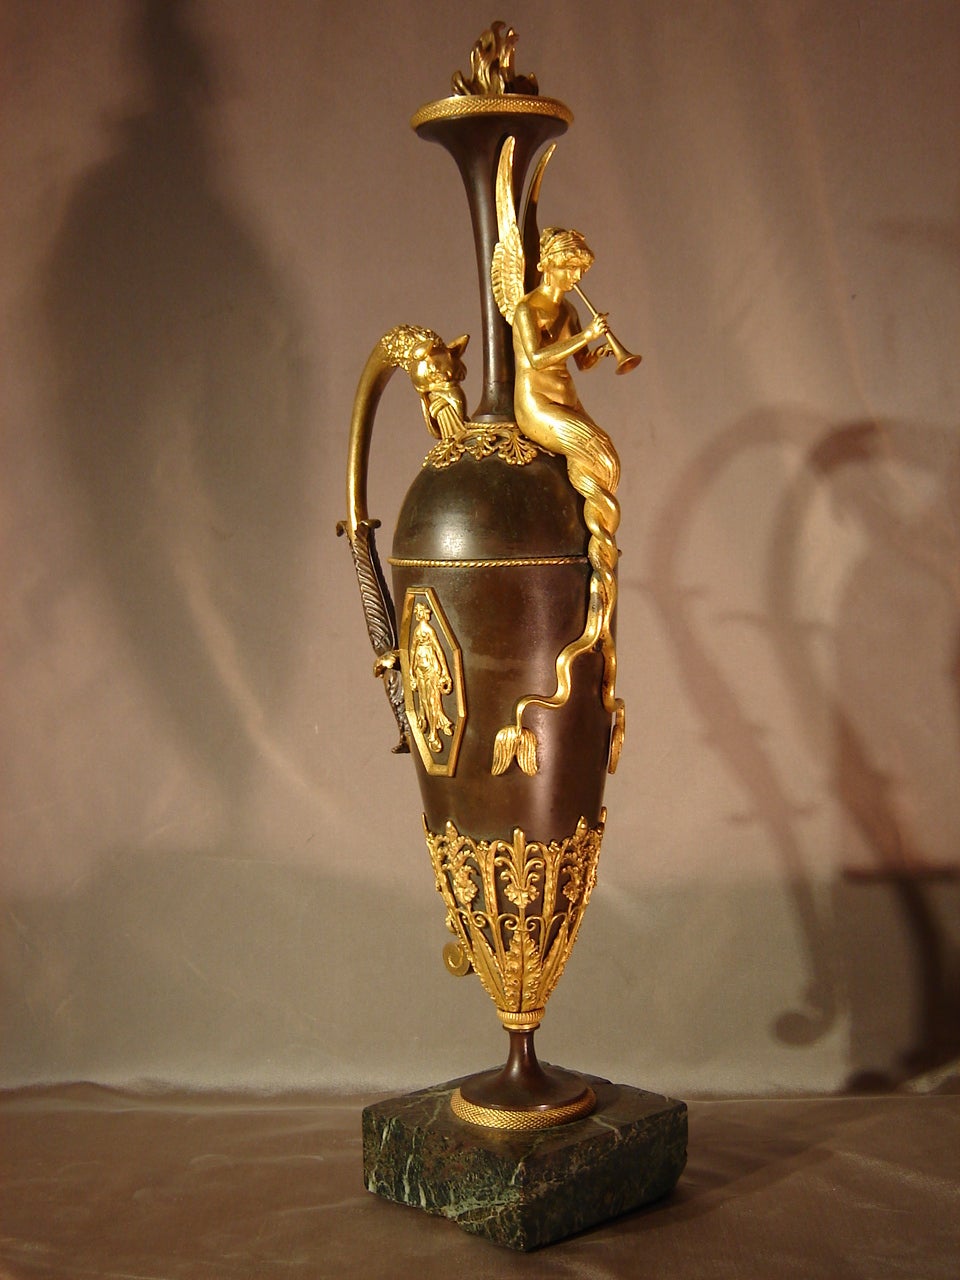 Exceptional ewer in chiseled and gilded bronze and patinated bronze from the early 19th Century, Empire period, attributed to Claude Galle (1759-1815).

Présence d'une sirène musicienne adossée au col de cette aiguière surmontée d'une flamme, anse